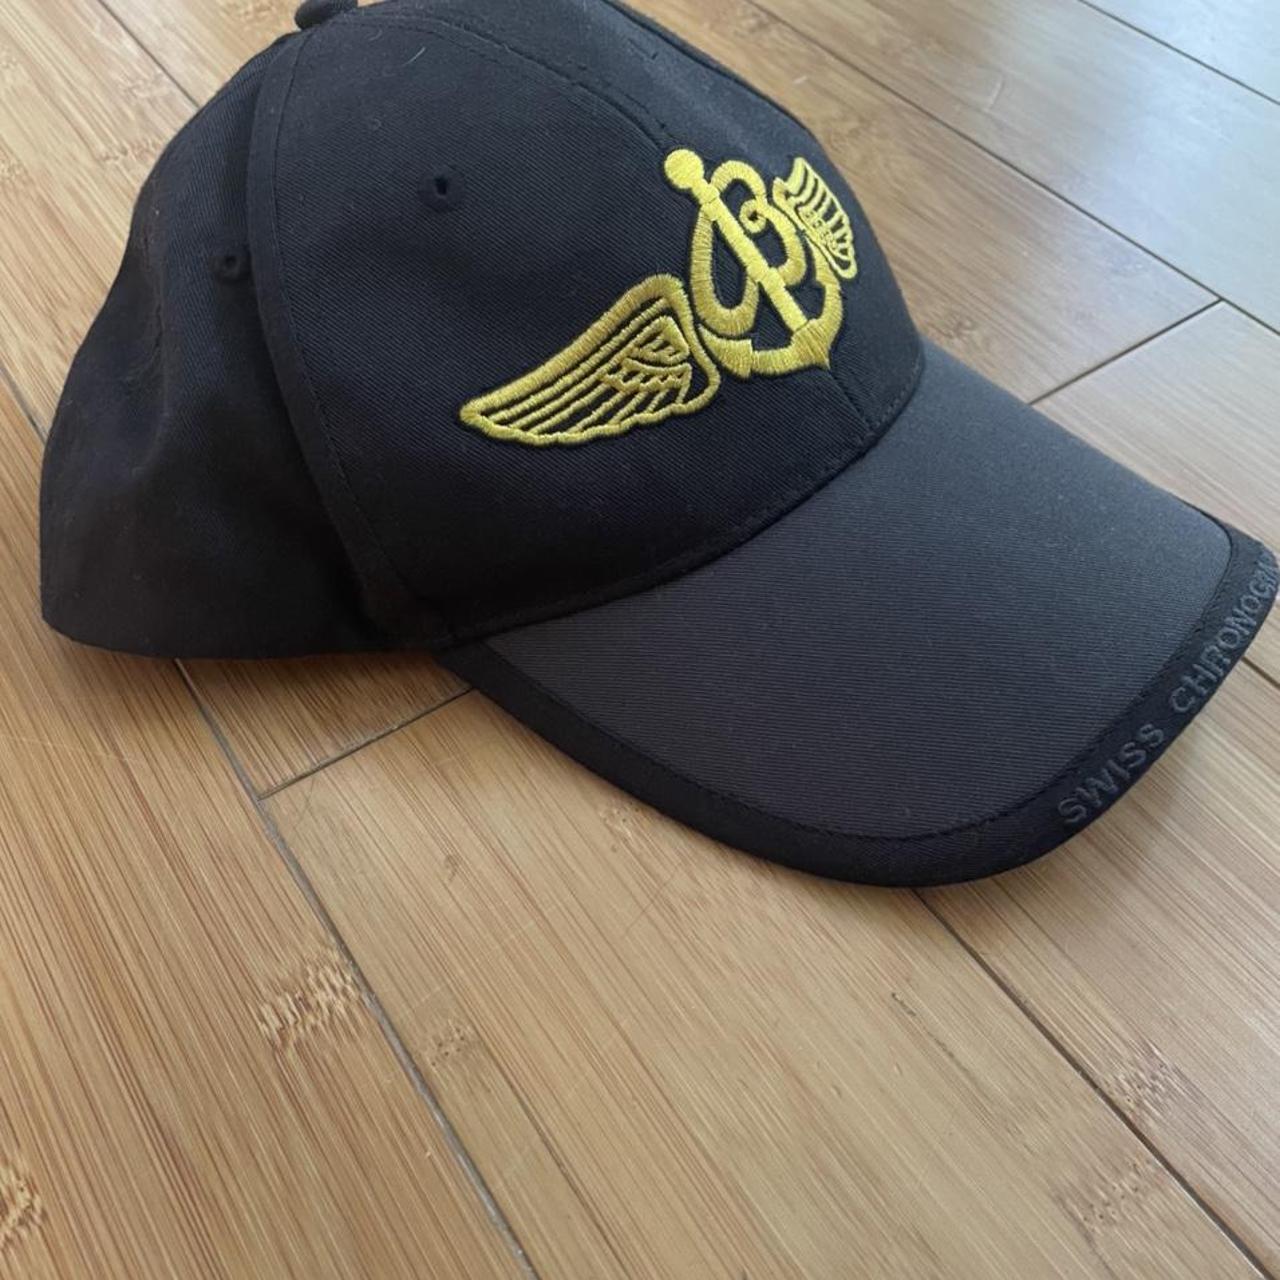 Product Image 2 - Breitling Swiss chronograph hat. Comes